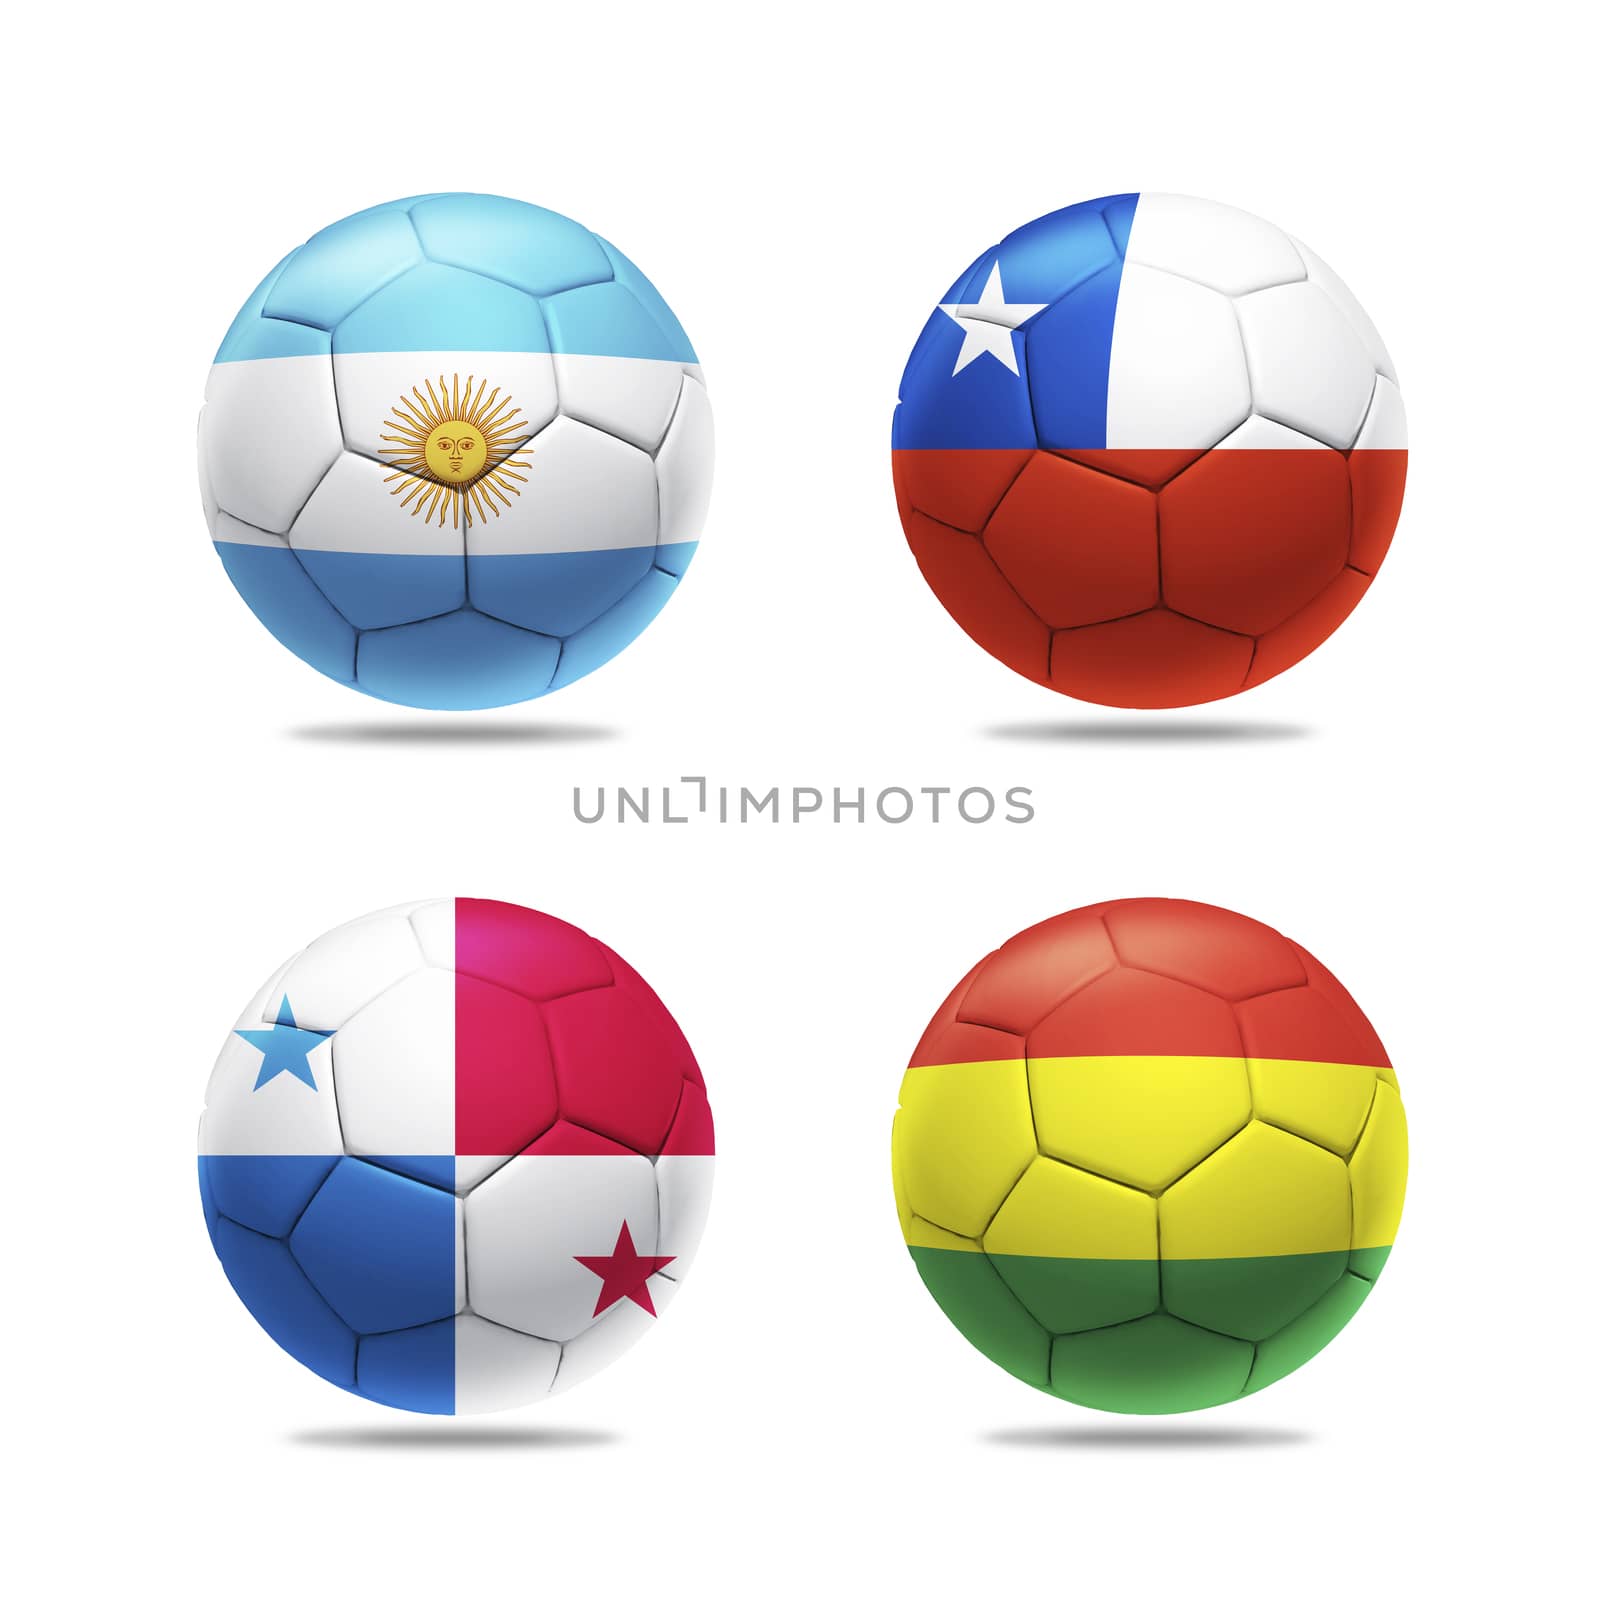 3D soccer ball with group D teams flags by koson